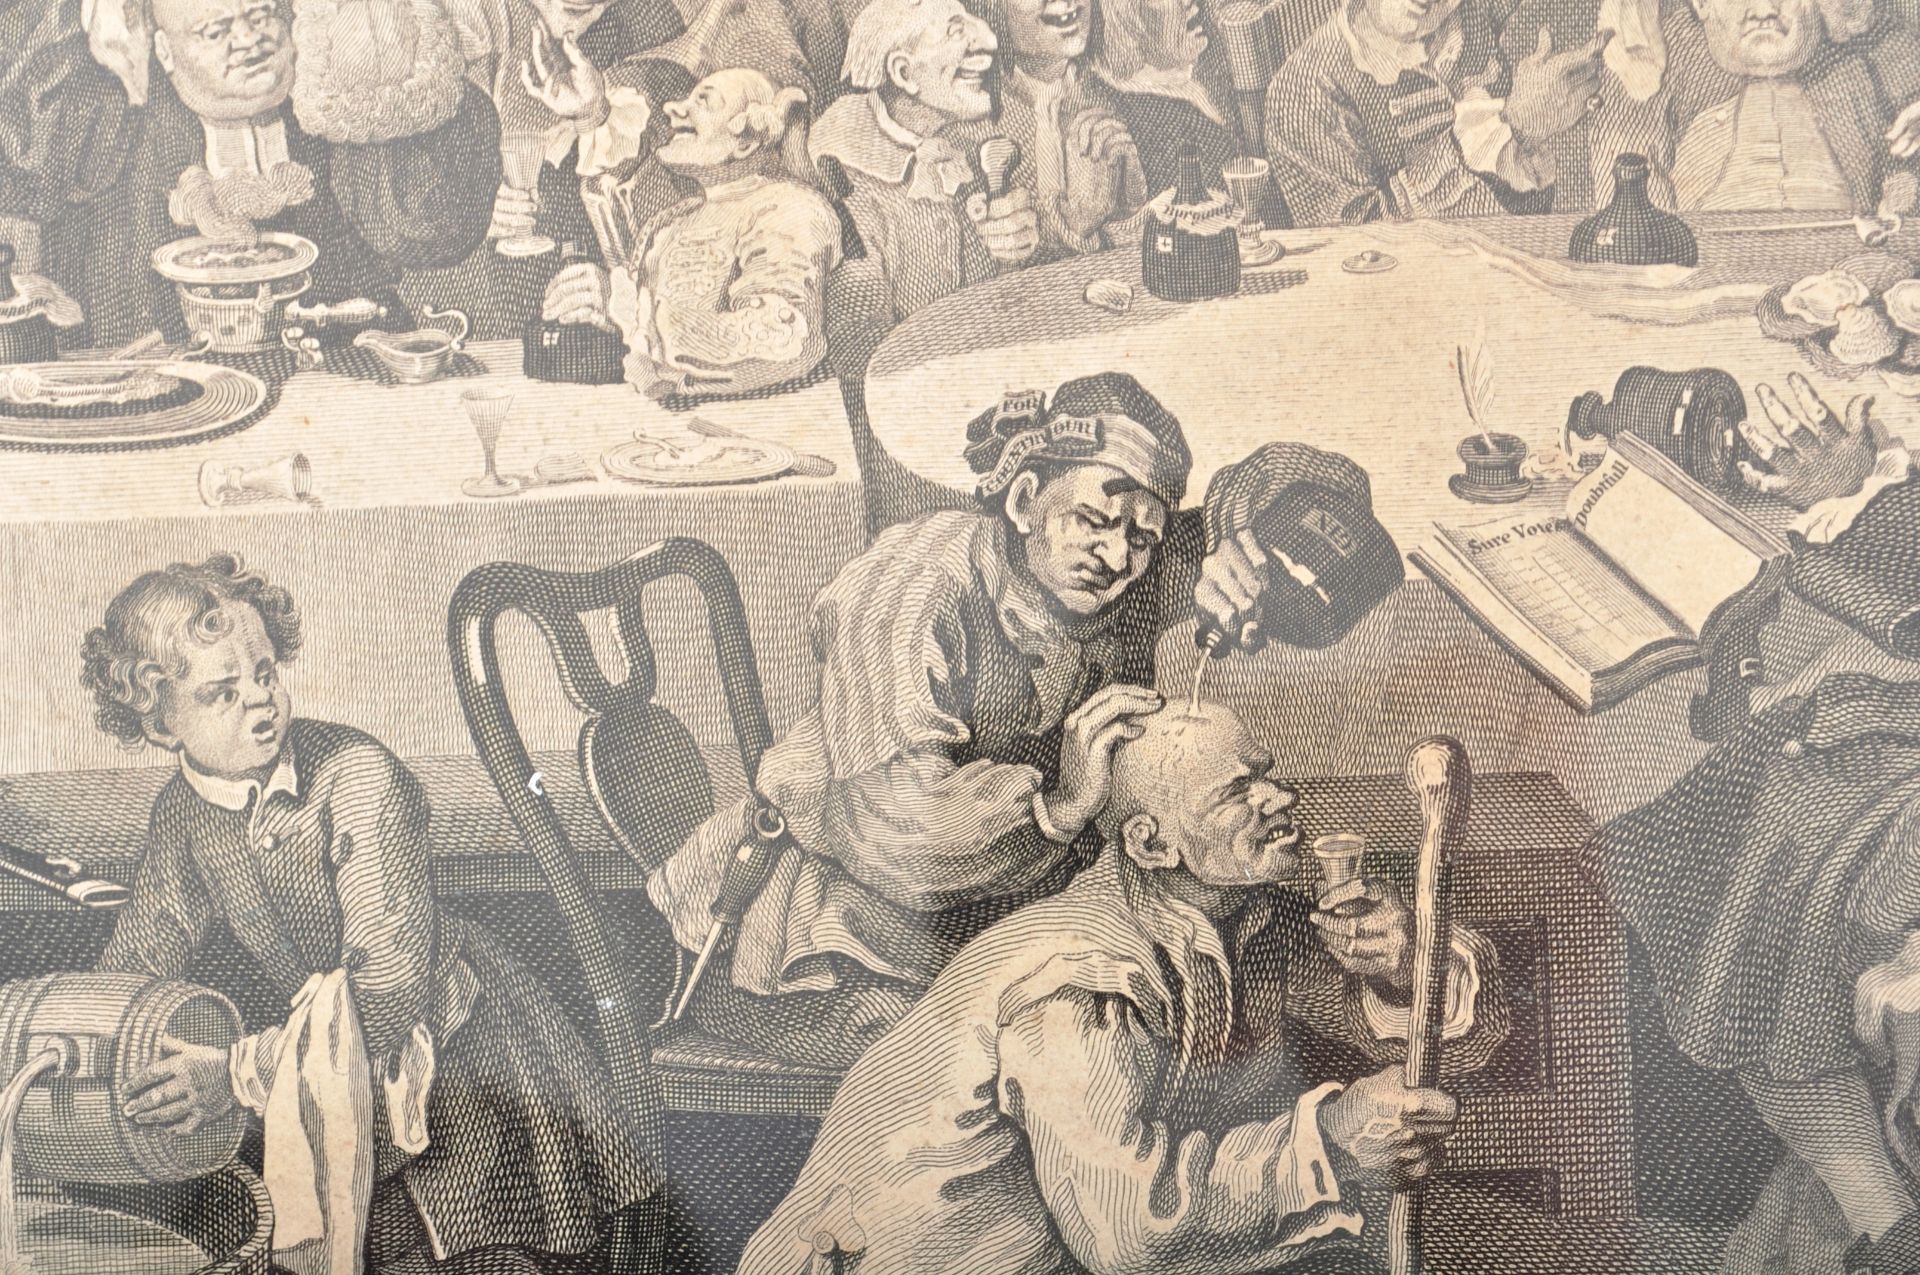 AFTER W. HOGARTH (1697-1764) - 'HUMOURS OF ELECTION' ENGRAVINGS - Image 10 of 12